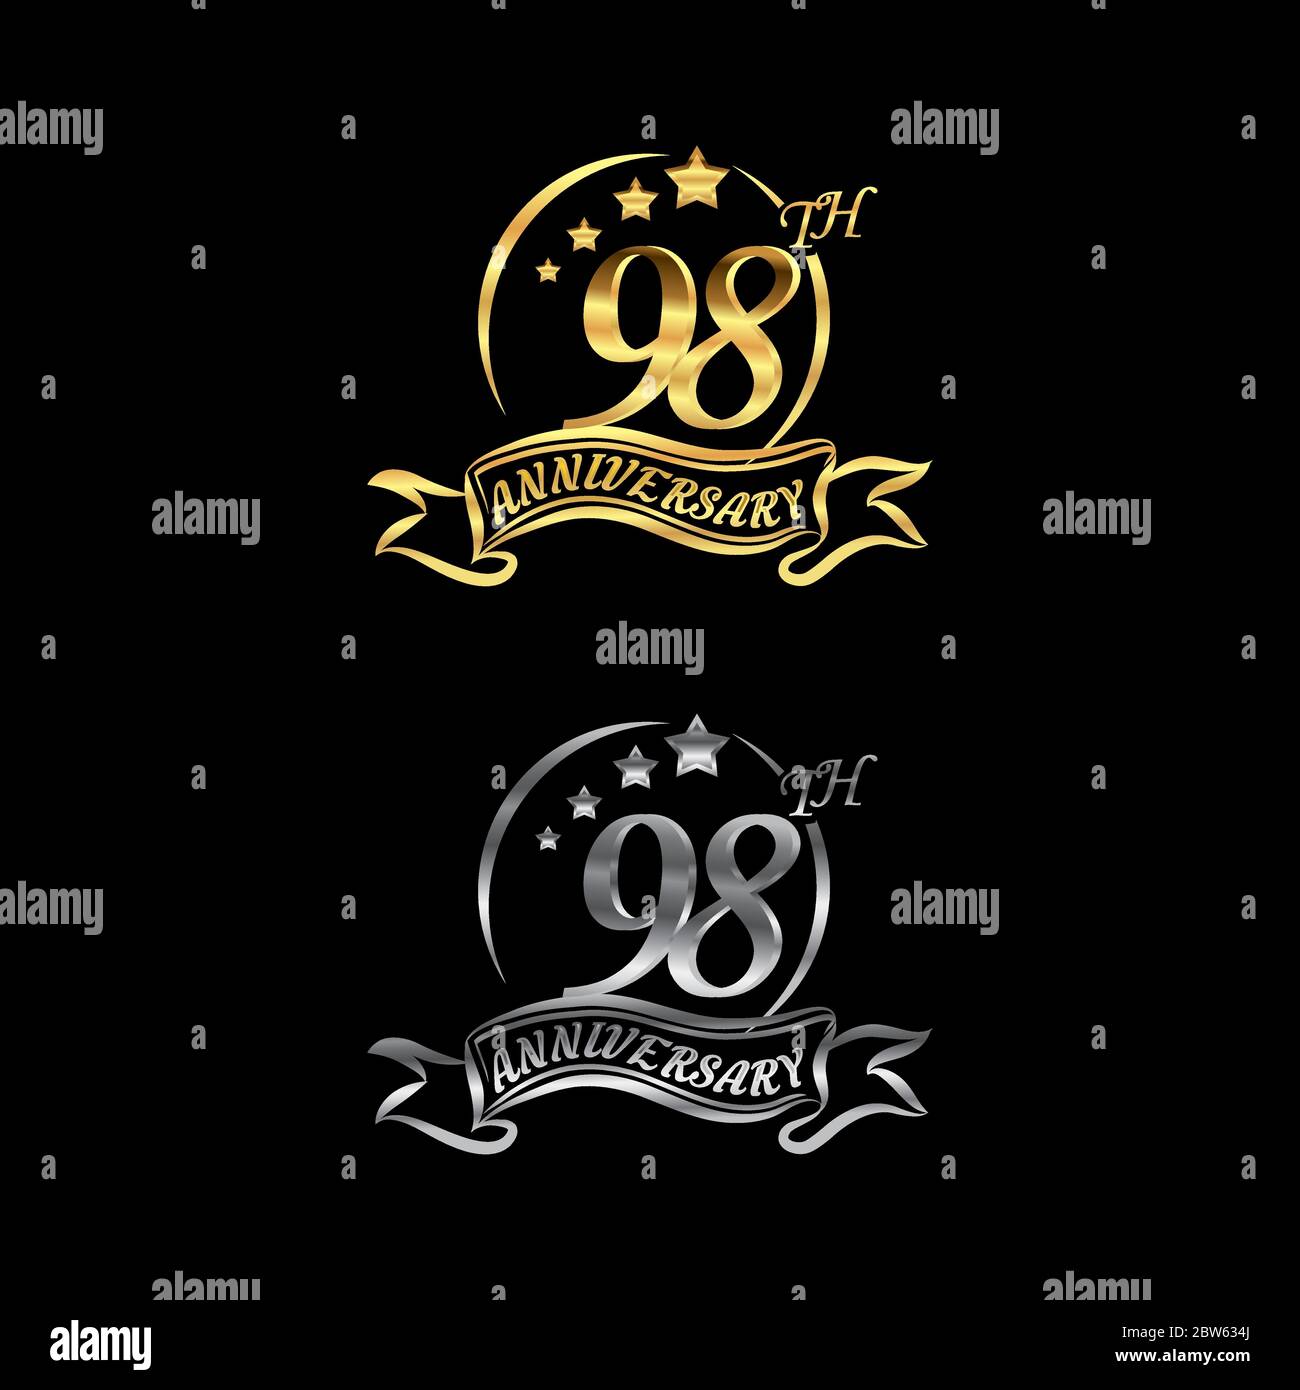 Celebrating the 98th anniversary logo,star shape, with gold and silver rings and gradation ribbons isolated on a black background.EPS 10 Stock Vector